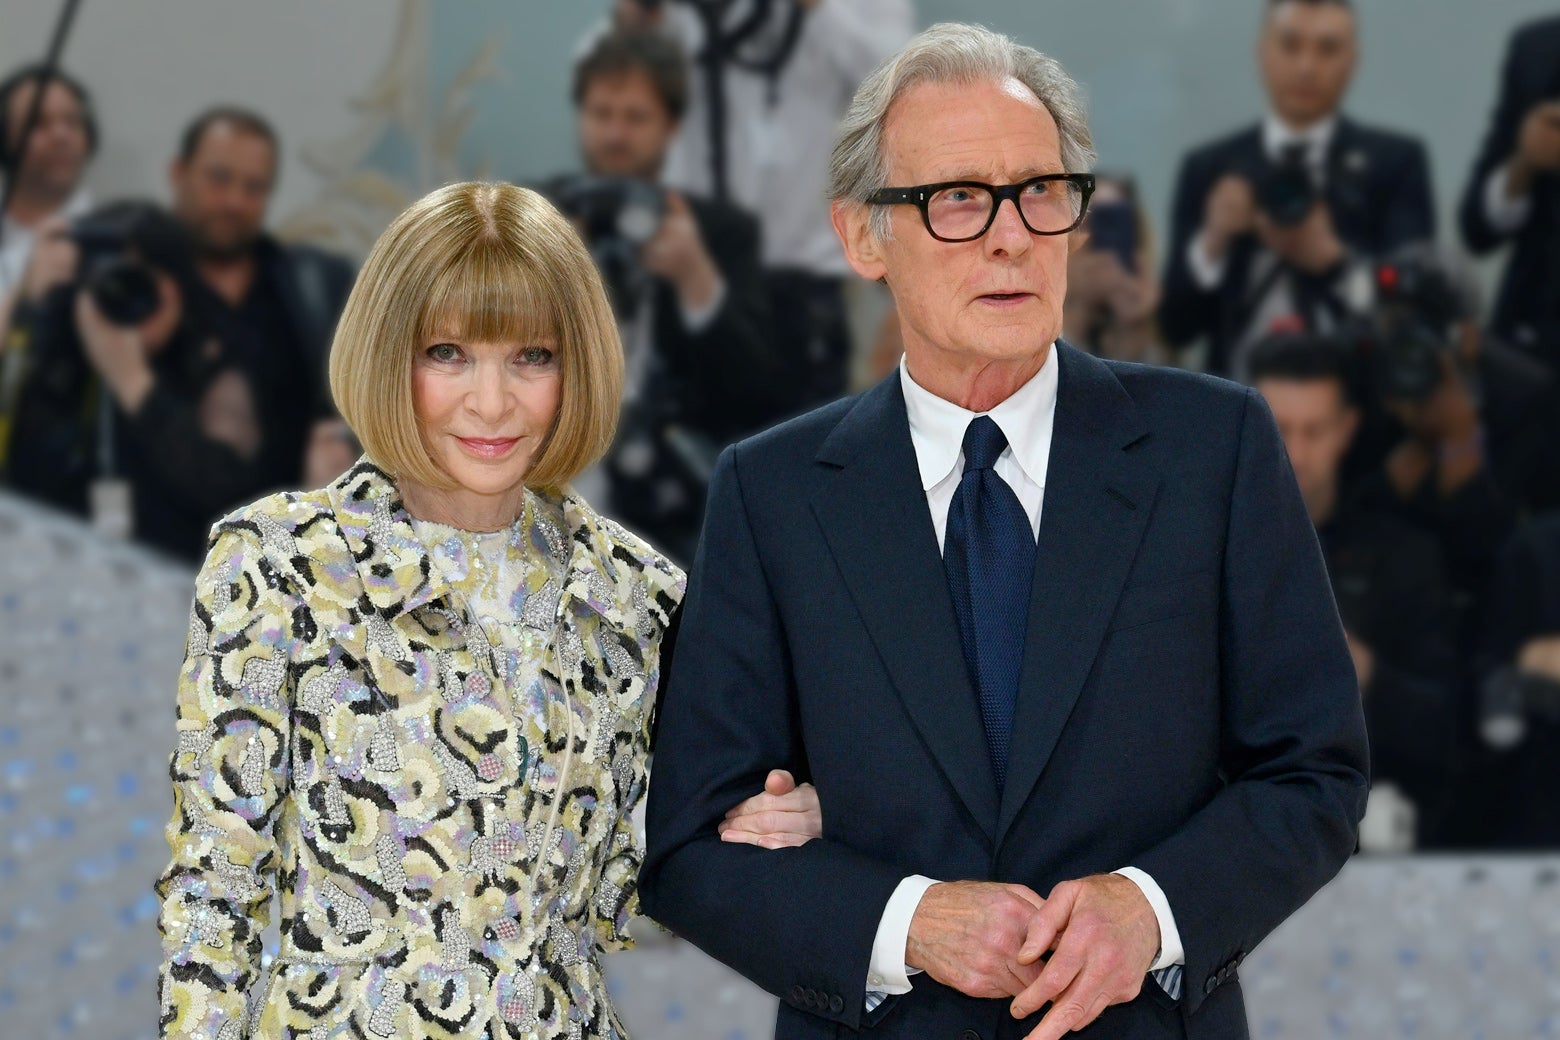 Is Anna Wintour dating Bill Nighy? What we know about their supposed ...